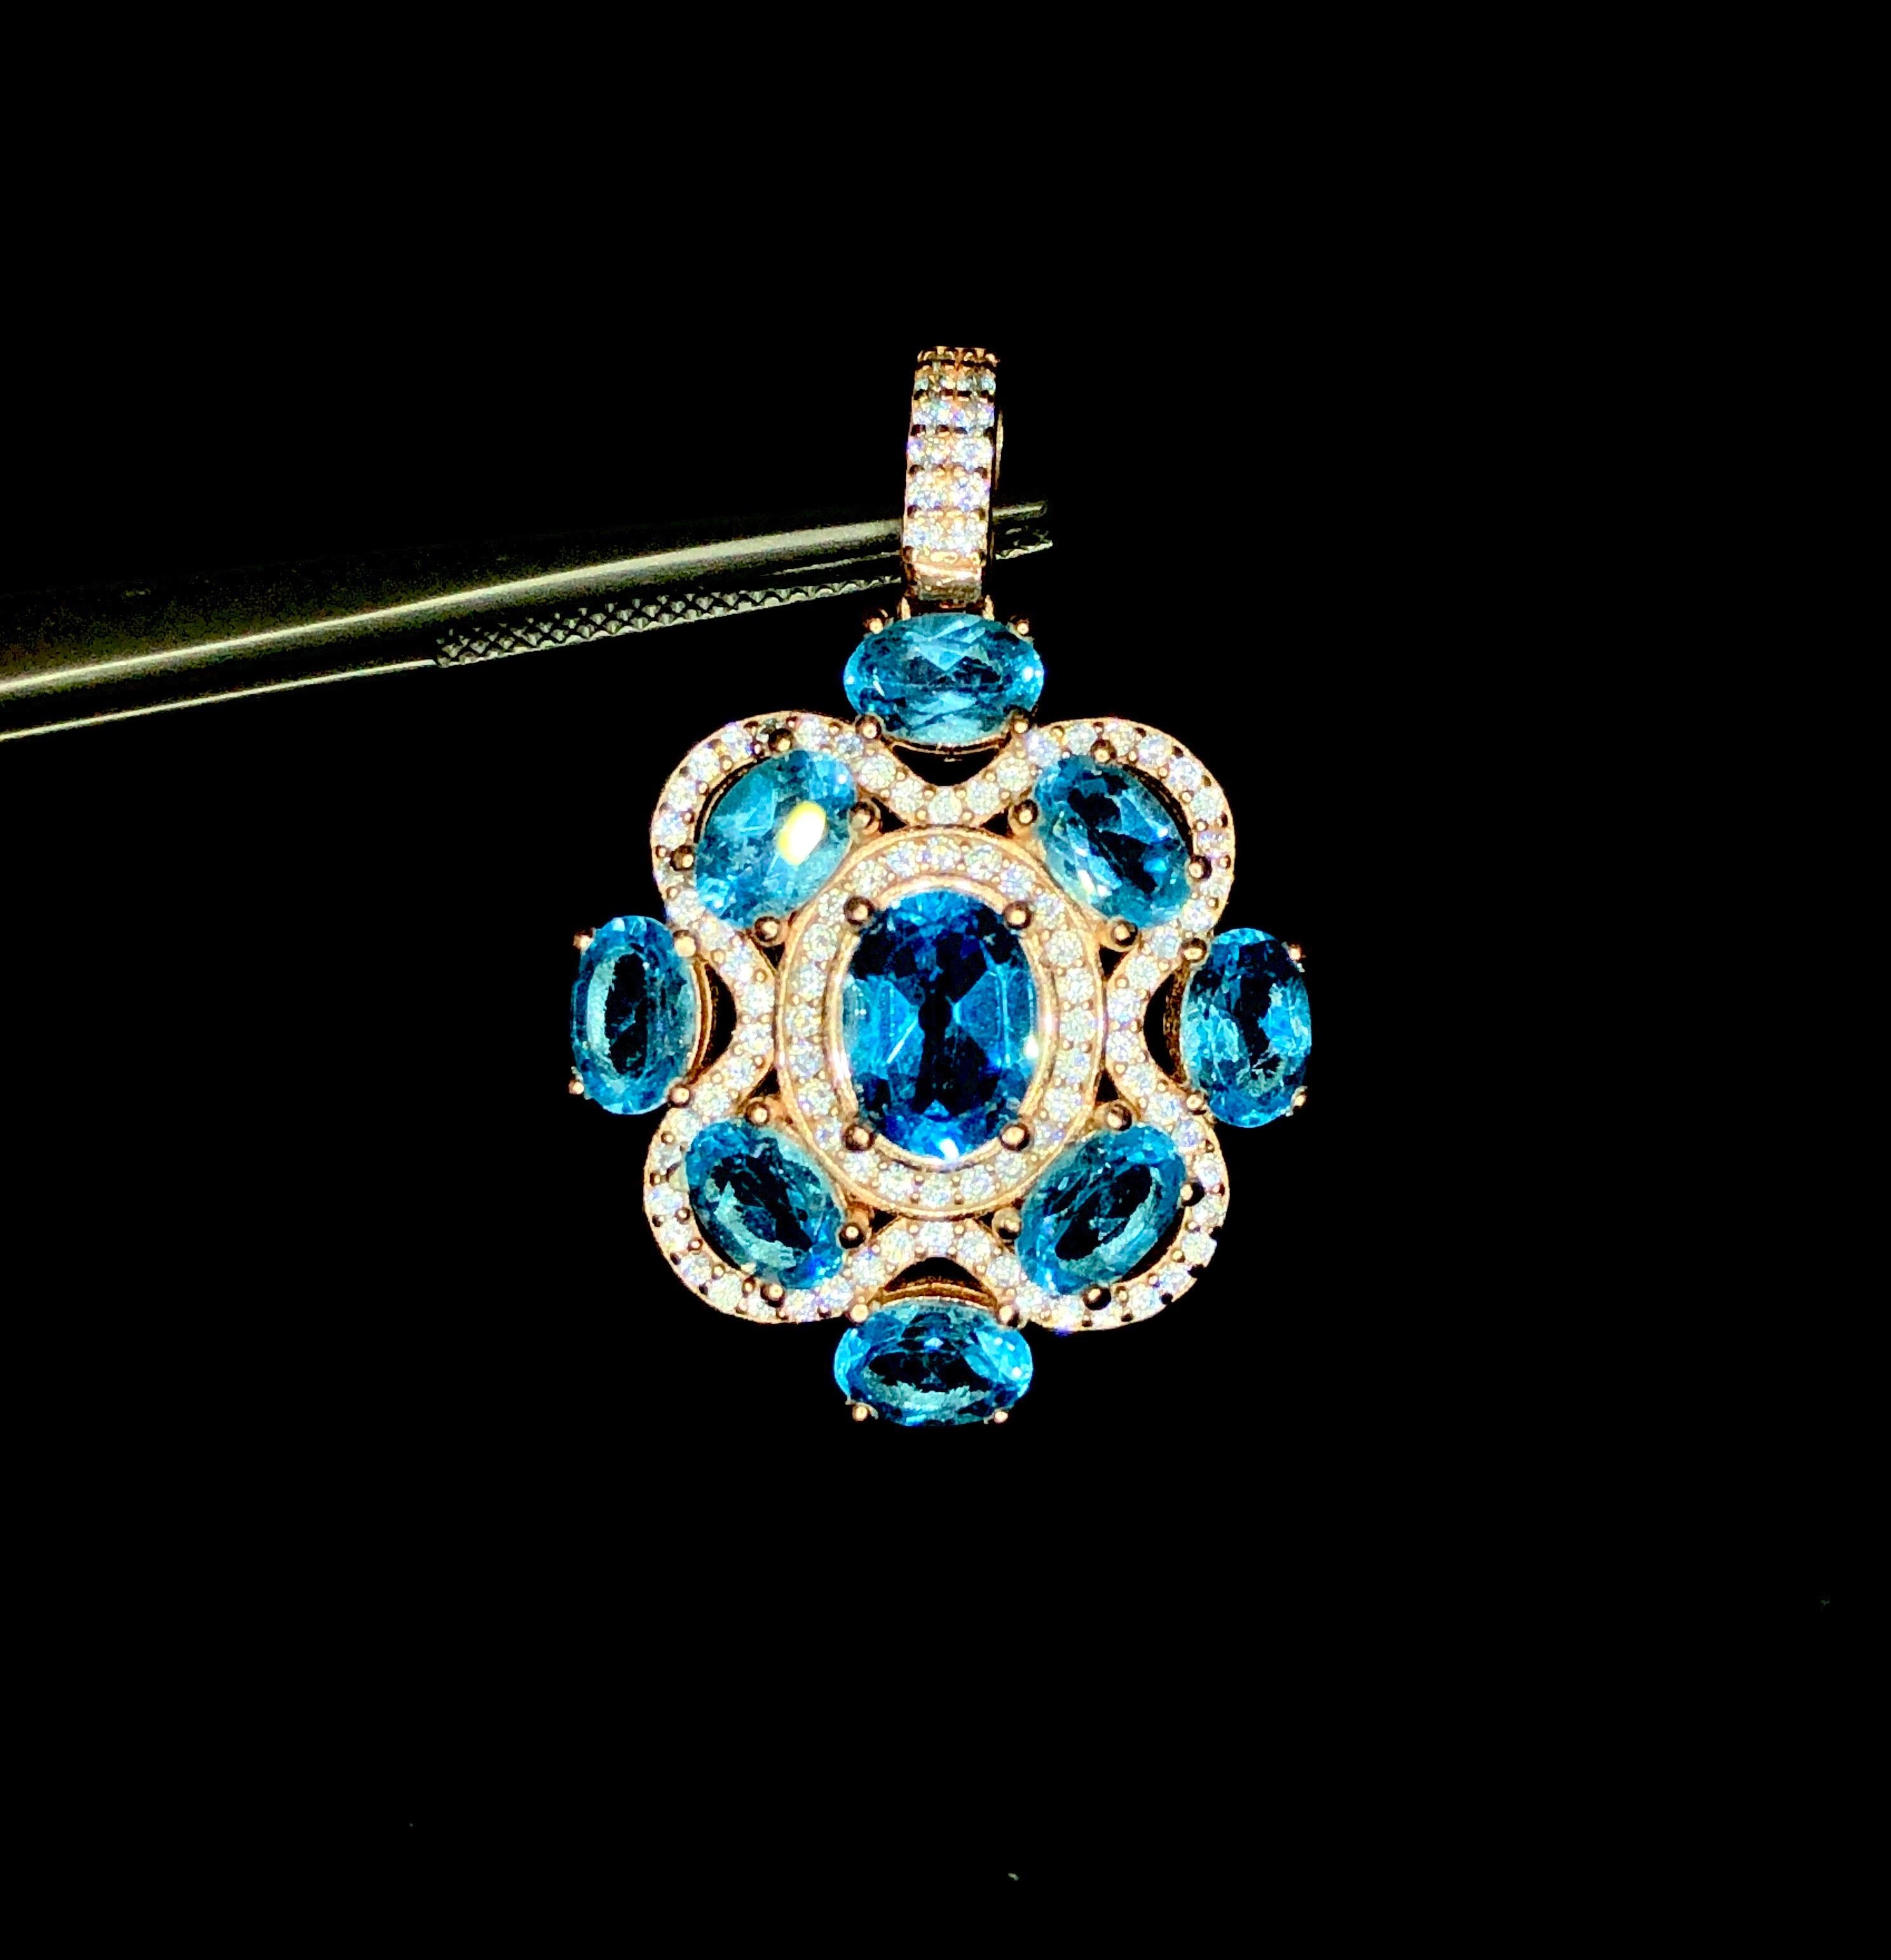 Introducing our exquisite Swiss Topaz Pendant, a true embodiment of elegance and charm. This captivating piece features a stunning Swiss Topaz embraced by sparkling cubic zircons, set meticulously in high-quality 925 silver. The pendant is adorned